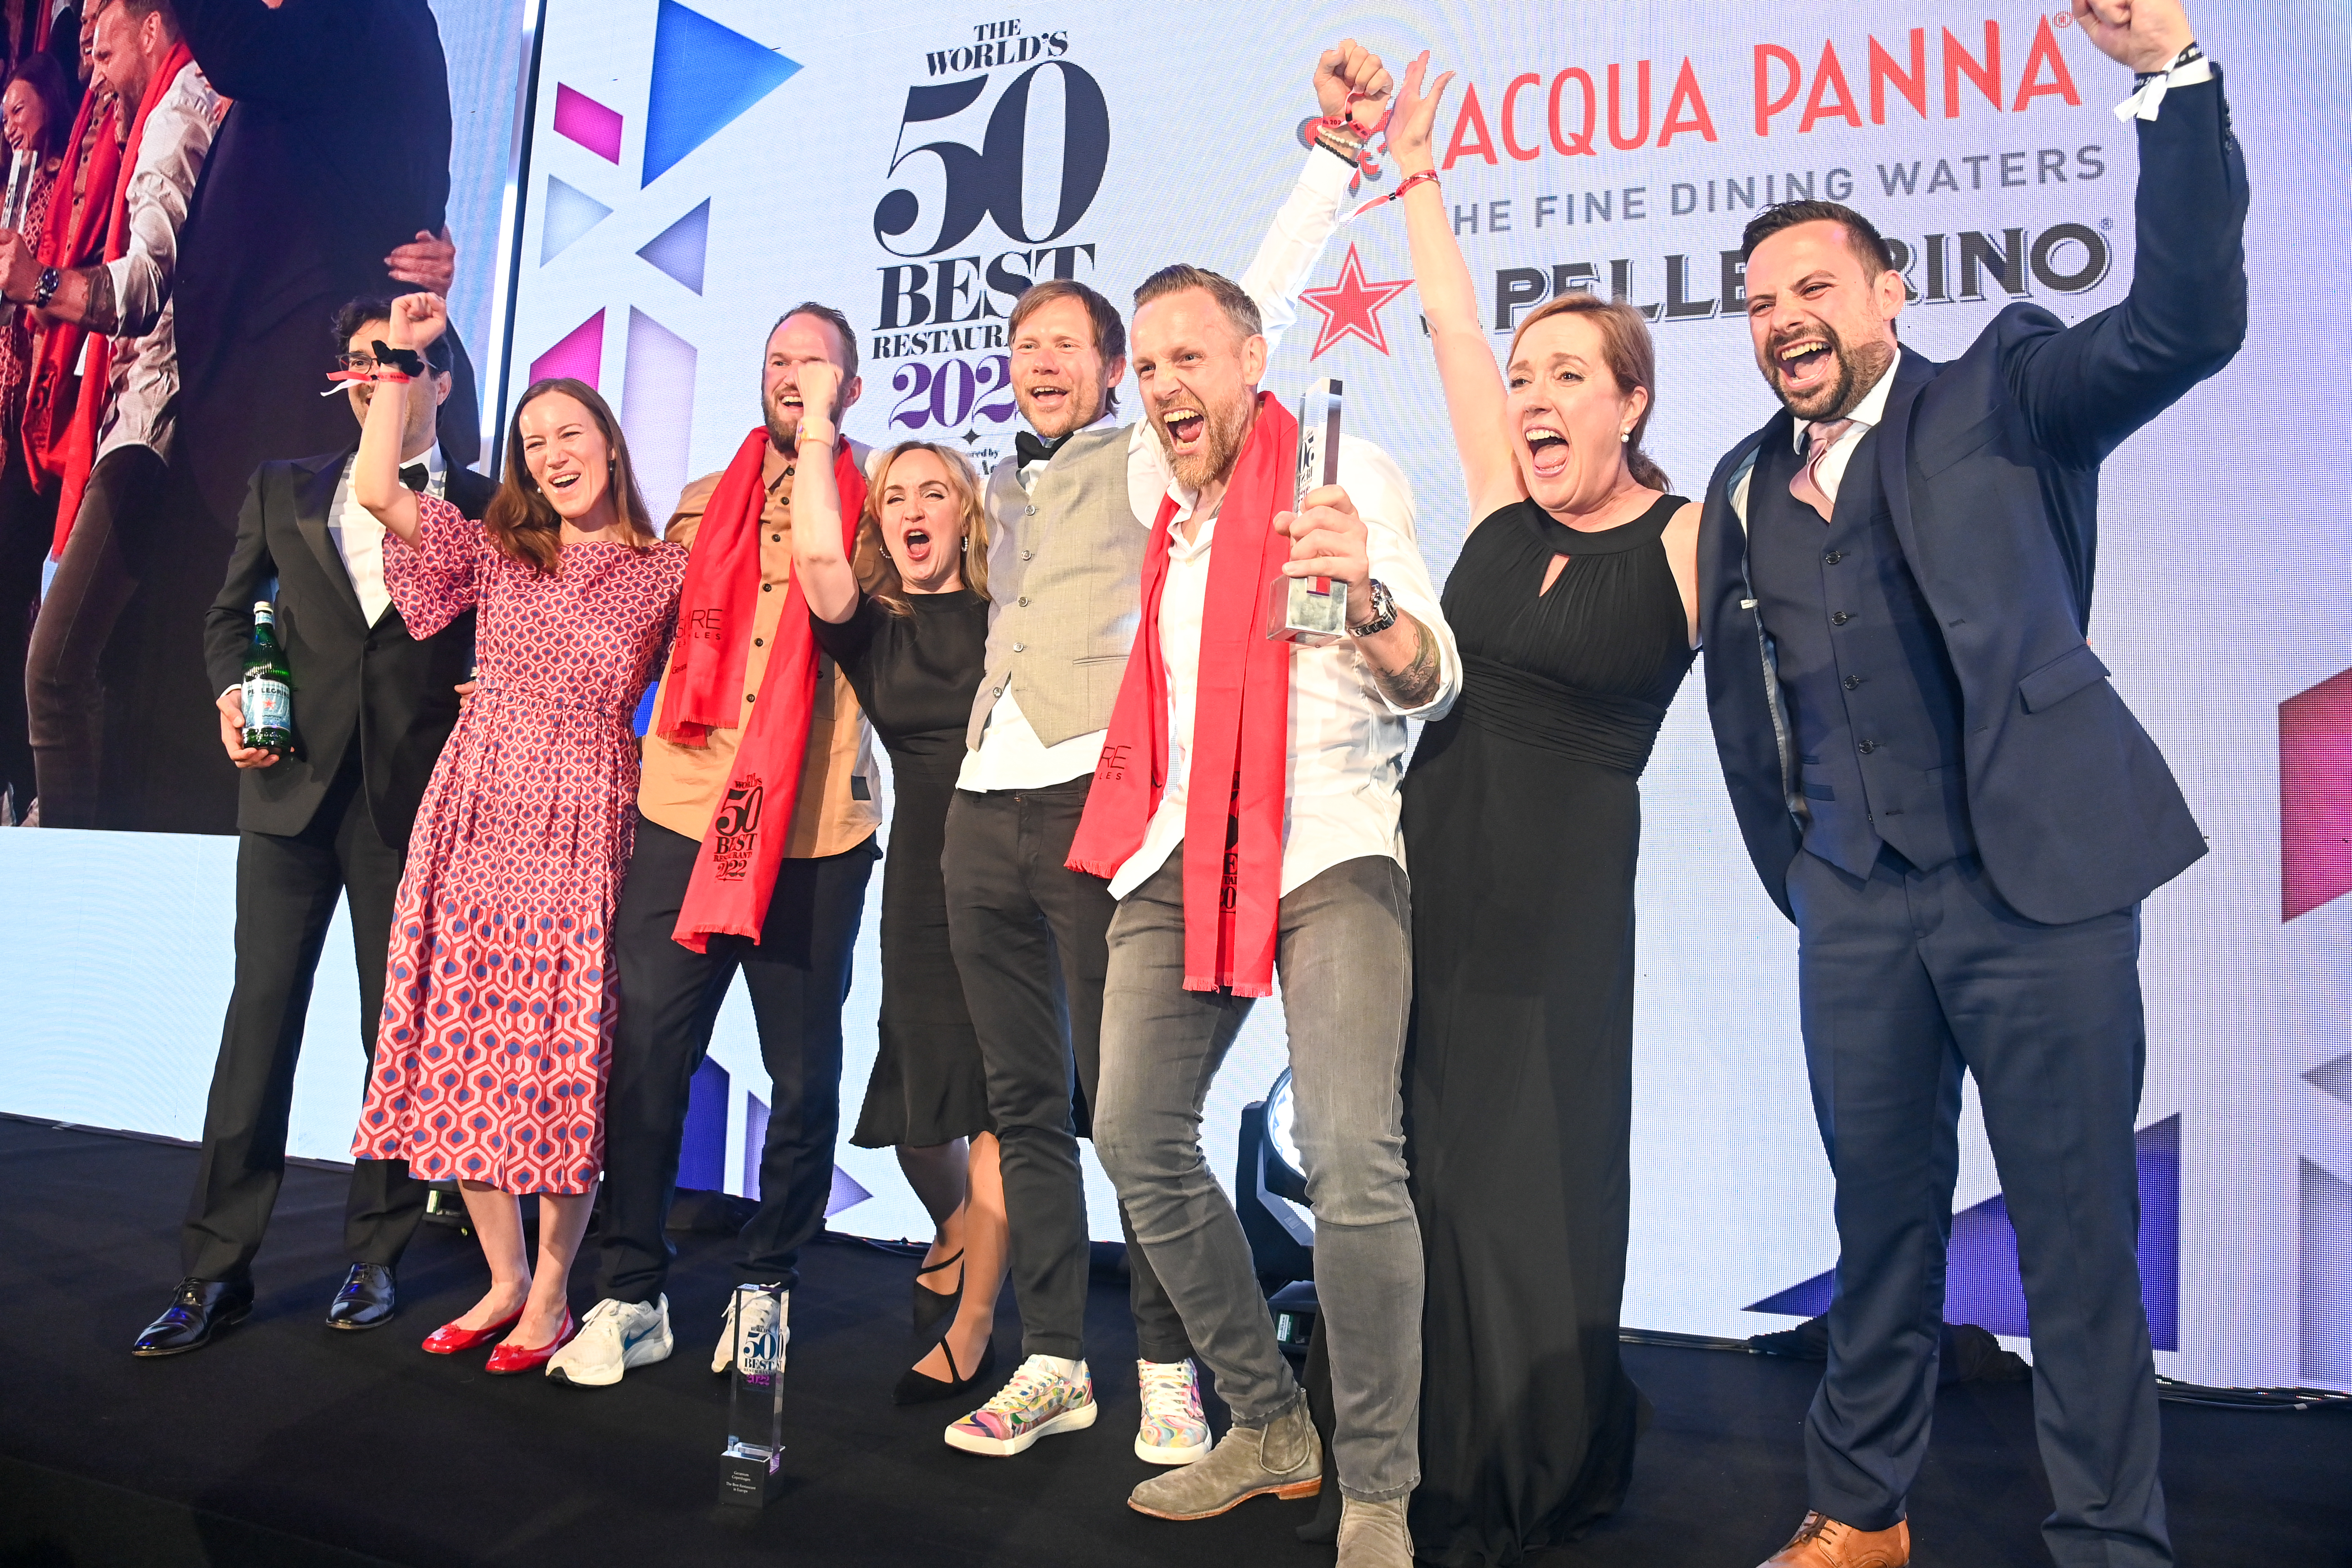 The Geranium team holds their arms up in victory in front of a screen featuring the World’s 50 Best logo.